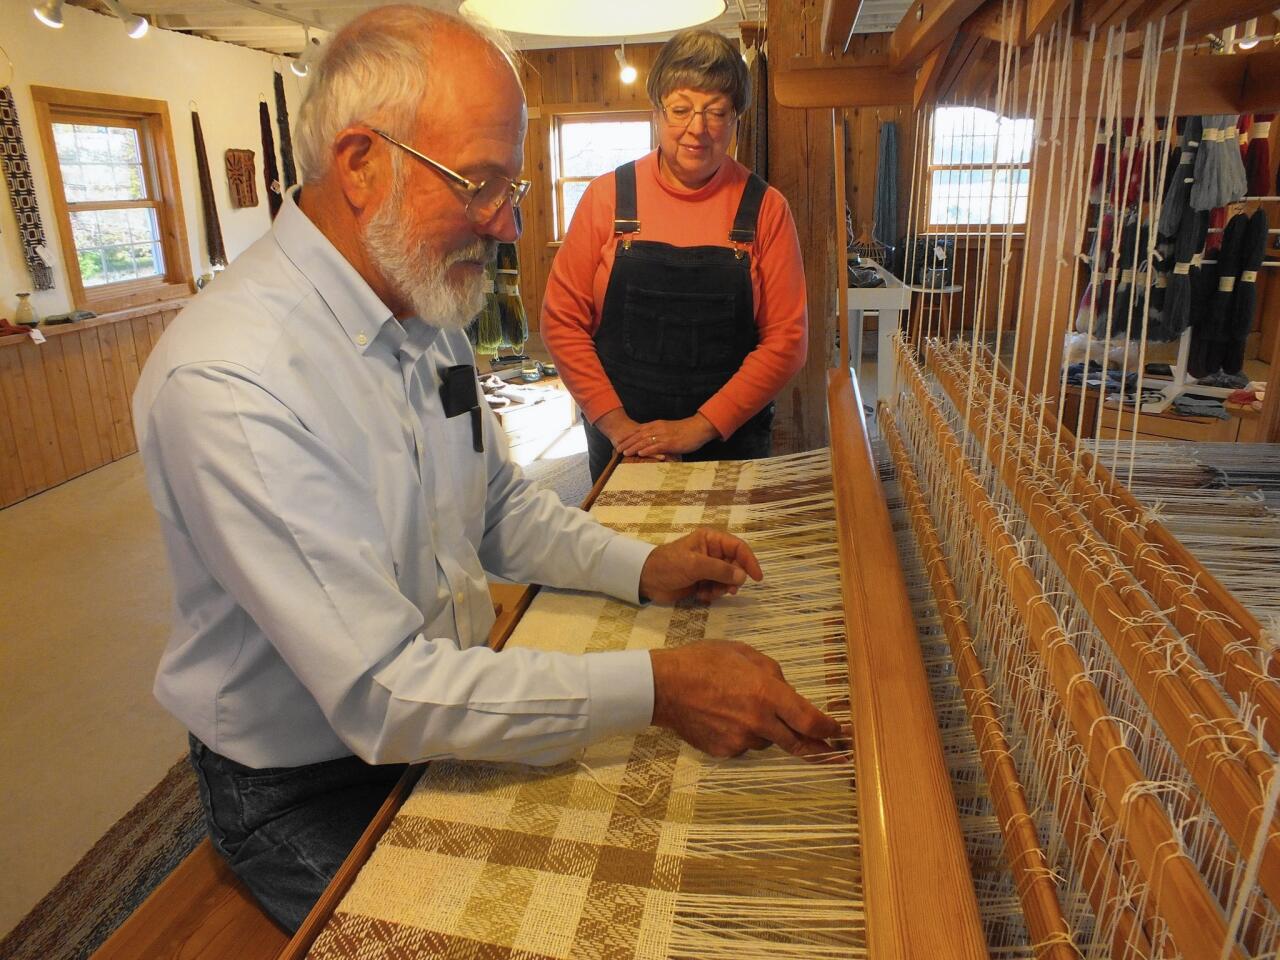 On a large loom, Dick Regnery of Whitefish Bay Farm crafts a wool, blanket while his wife, Gretchen, watches.